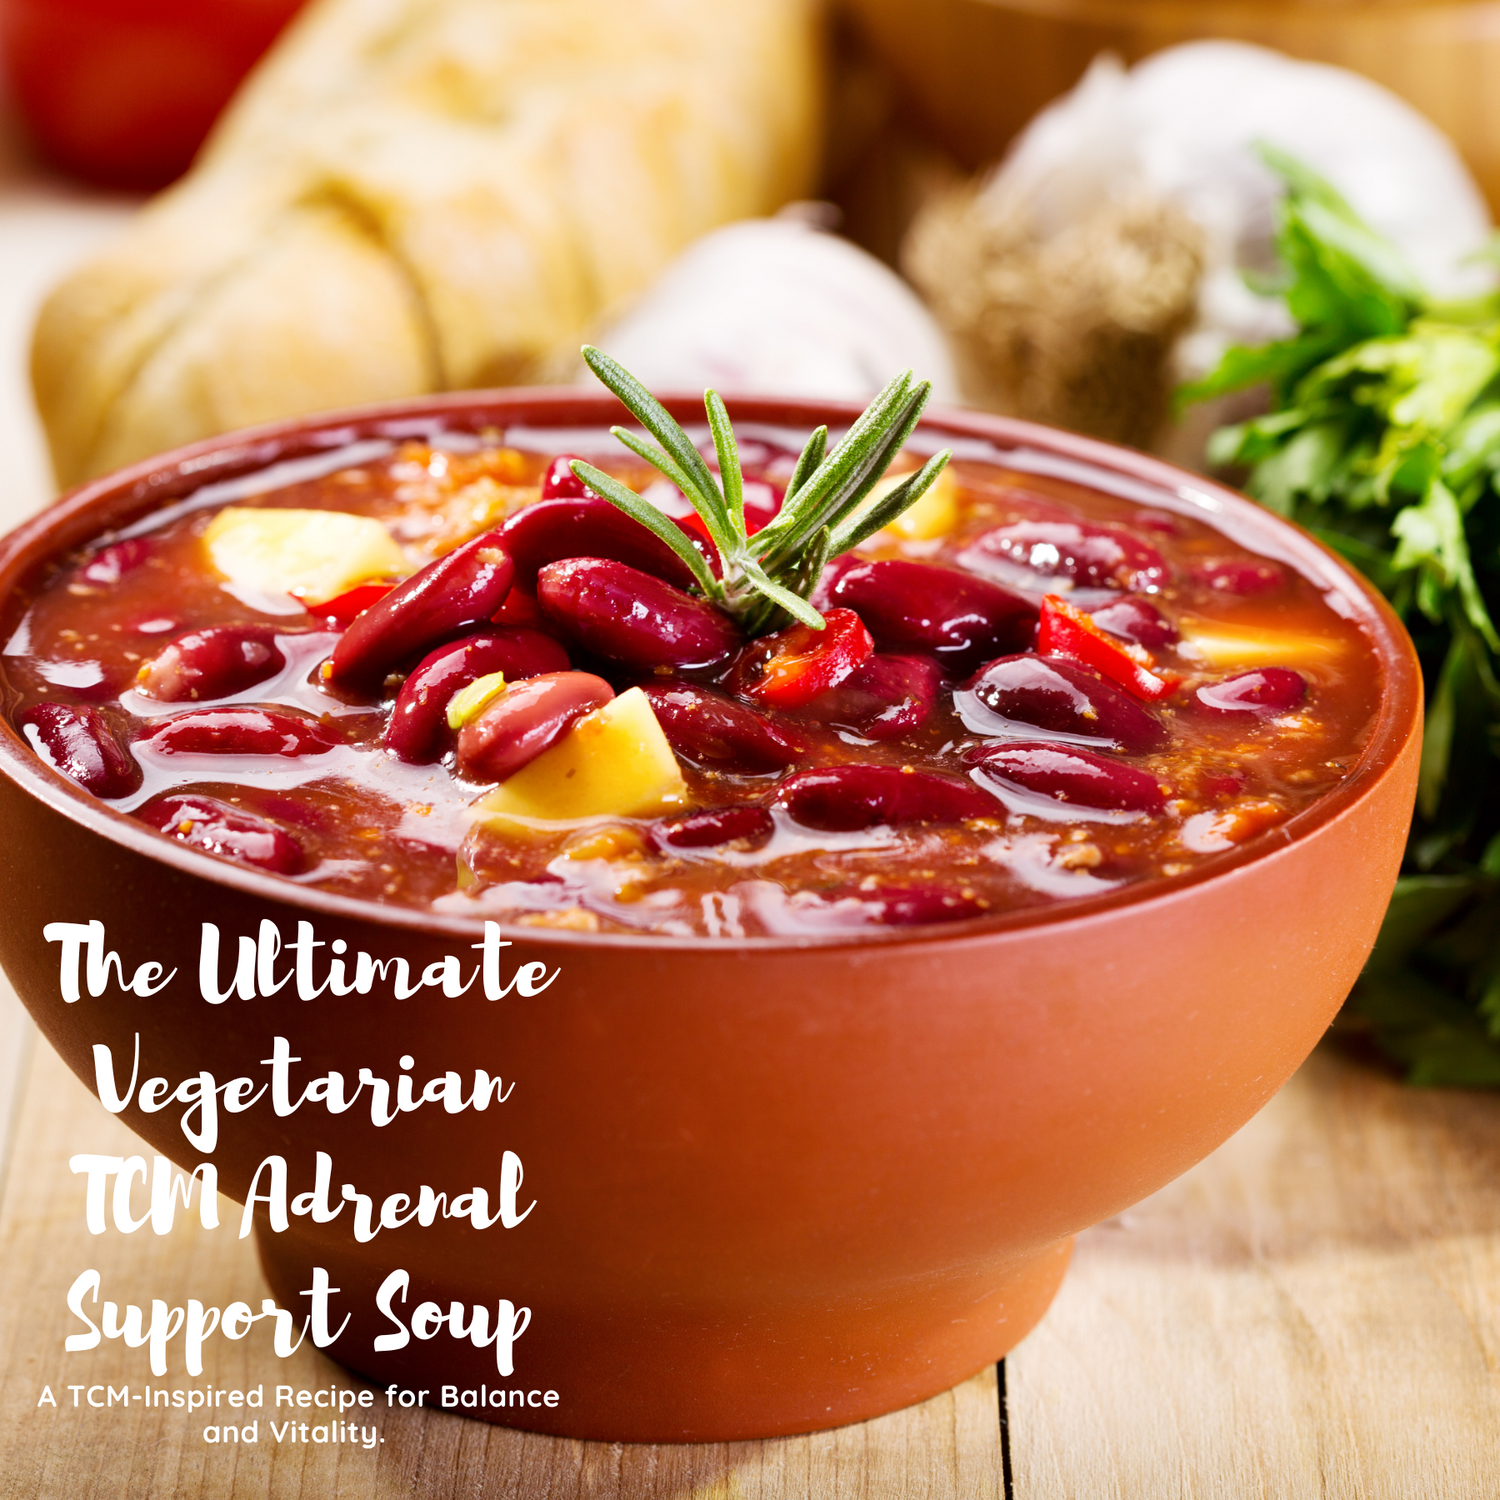 The Ultimate Vegetarian TCM Adrenal Support Soup: A TCM-Inspired Recipe for Balance and Vitality